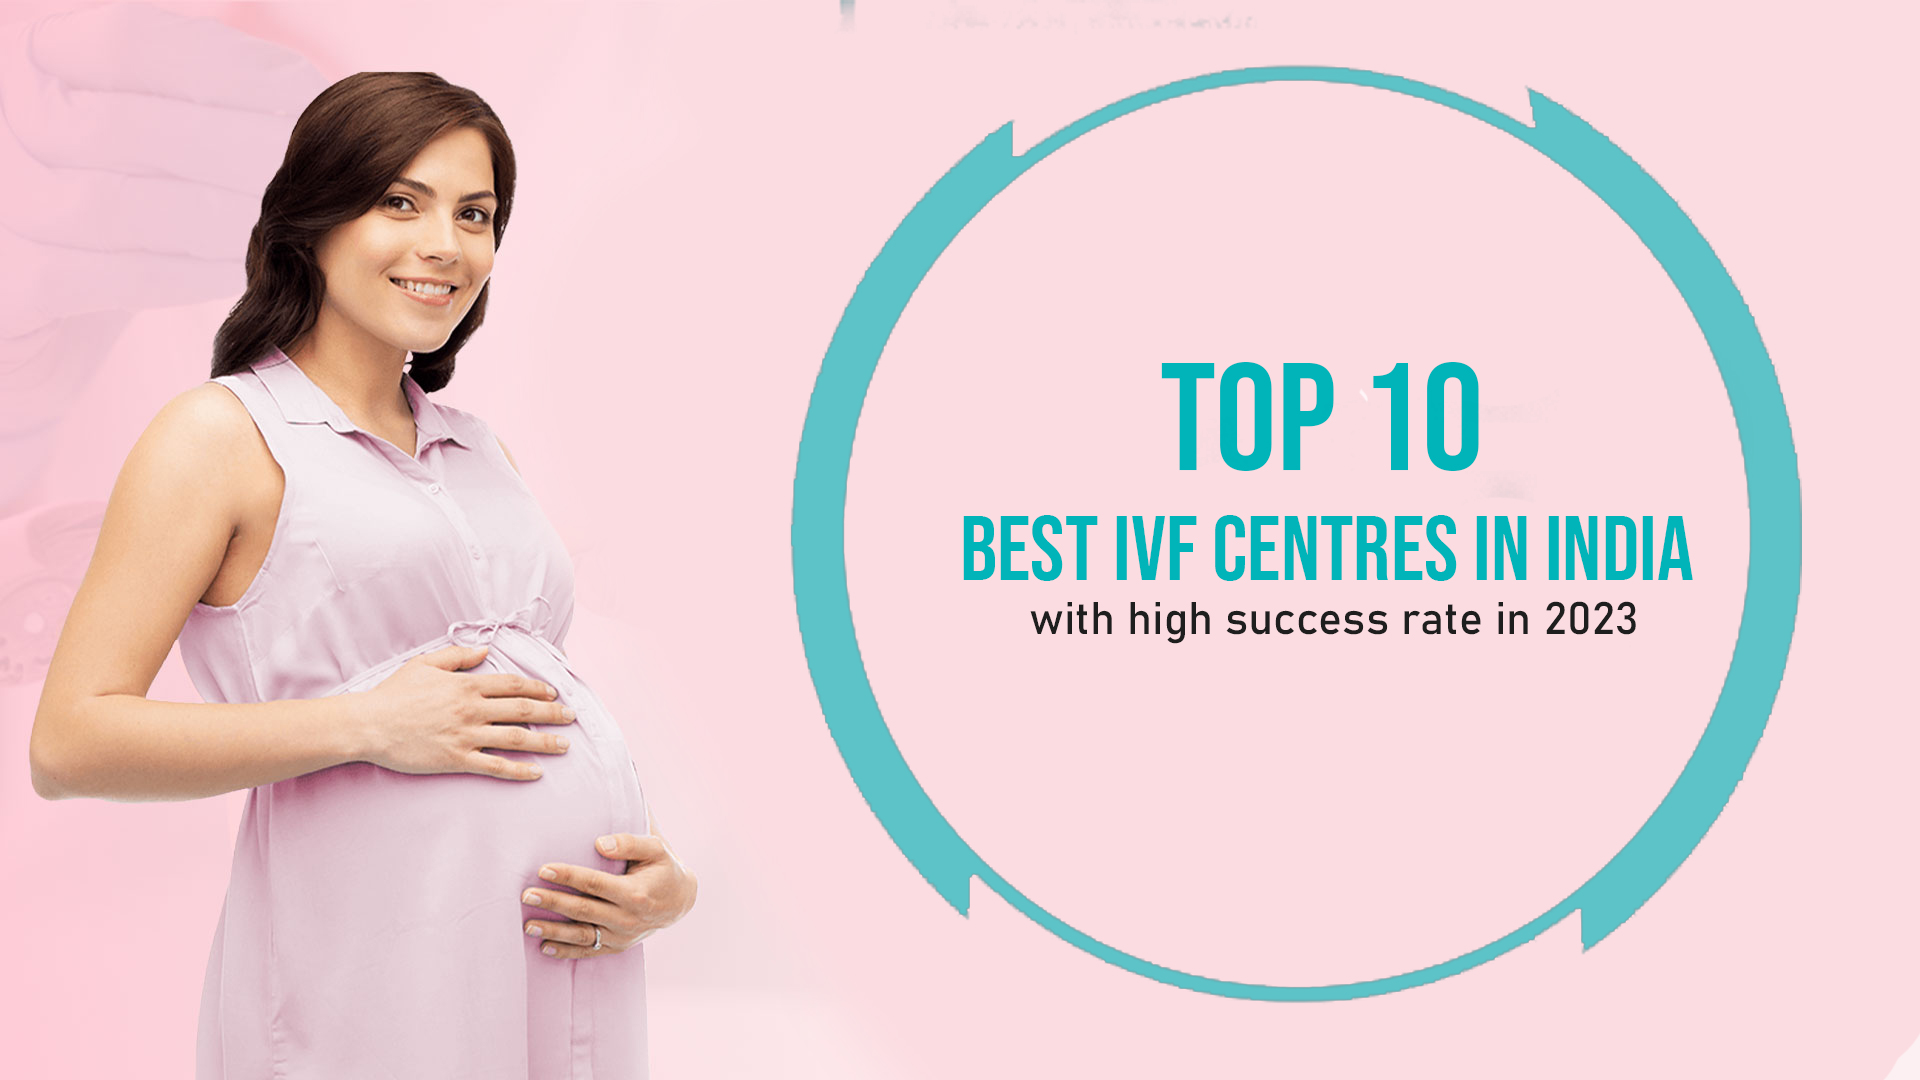 Top 10 Best IVF Centres in India - 2013